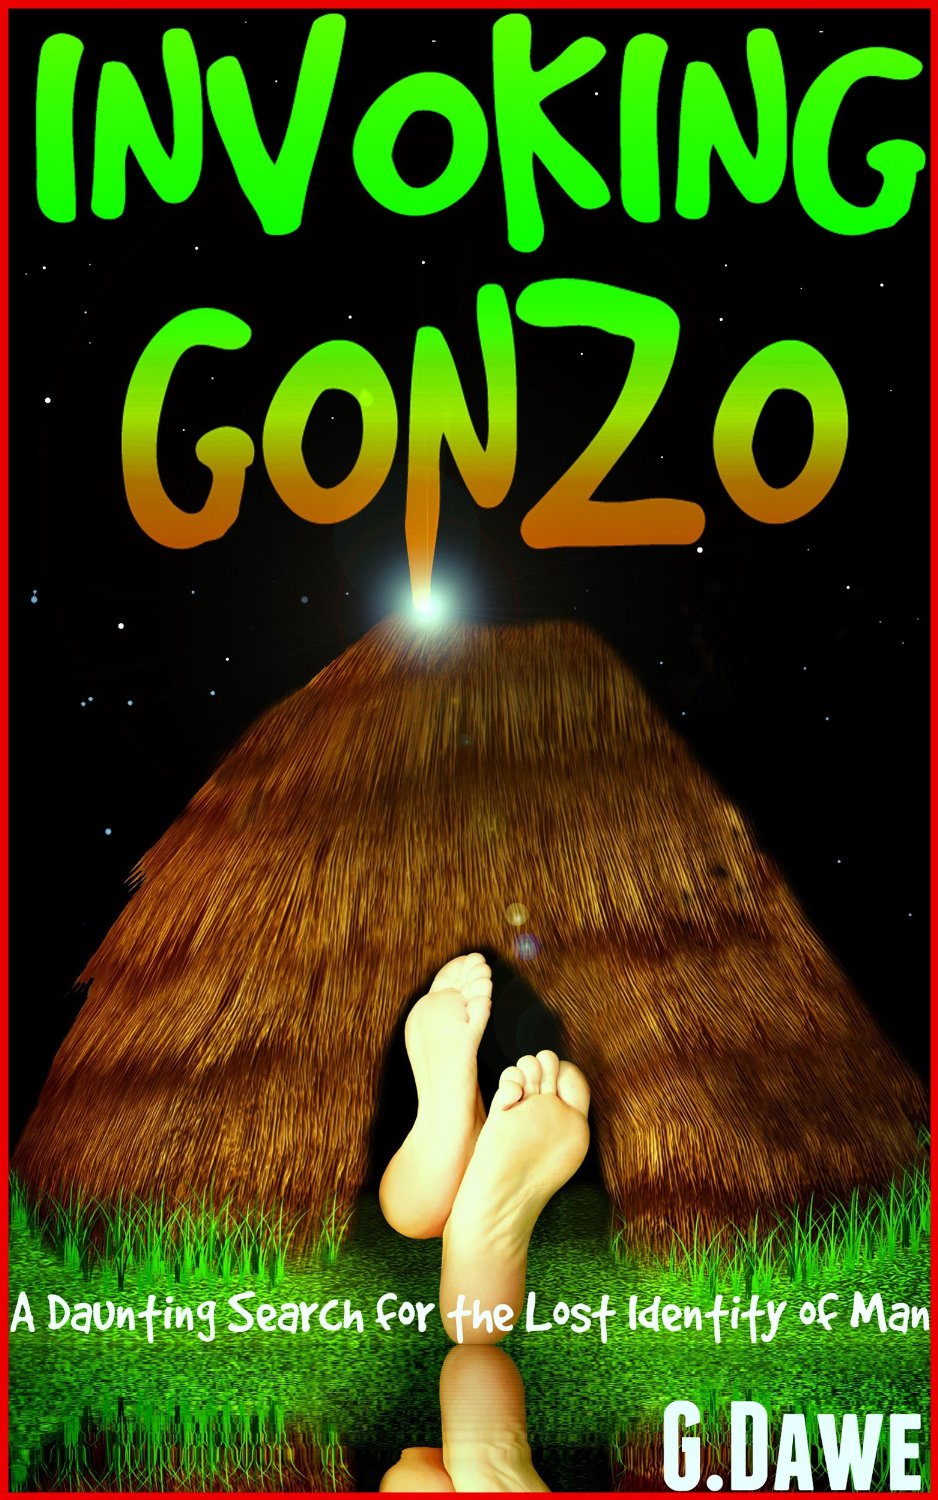 Invoking Gonzo – A Daunting Search for the Lost Identity of Man by G. Dawe